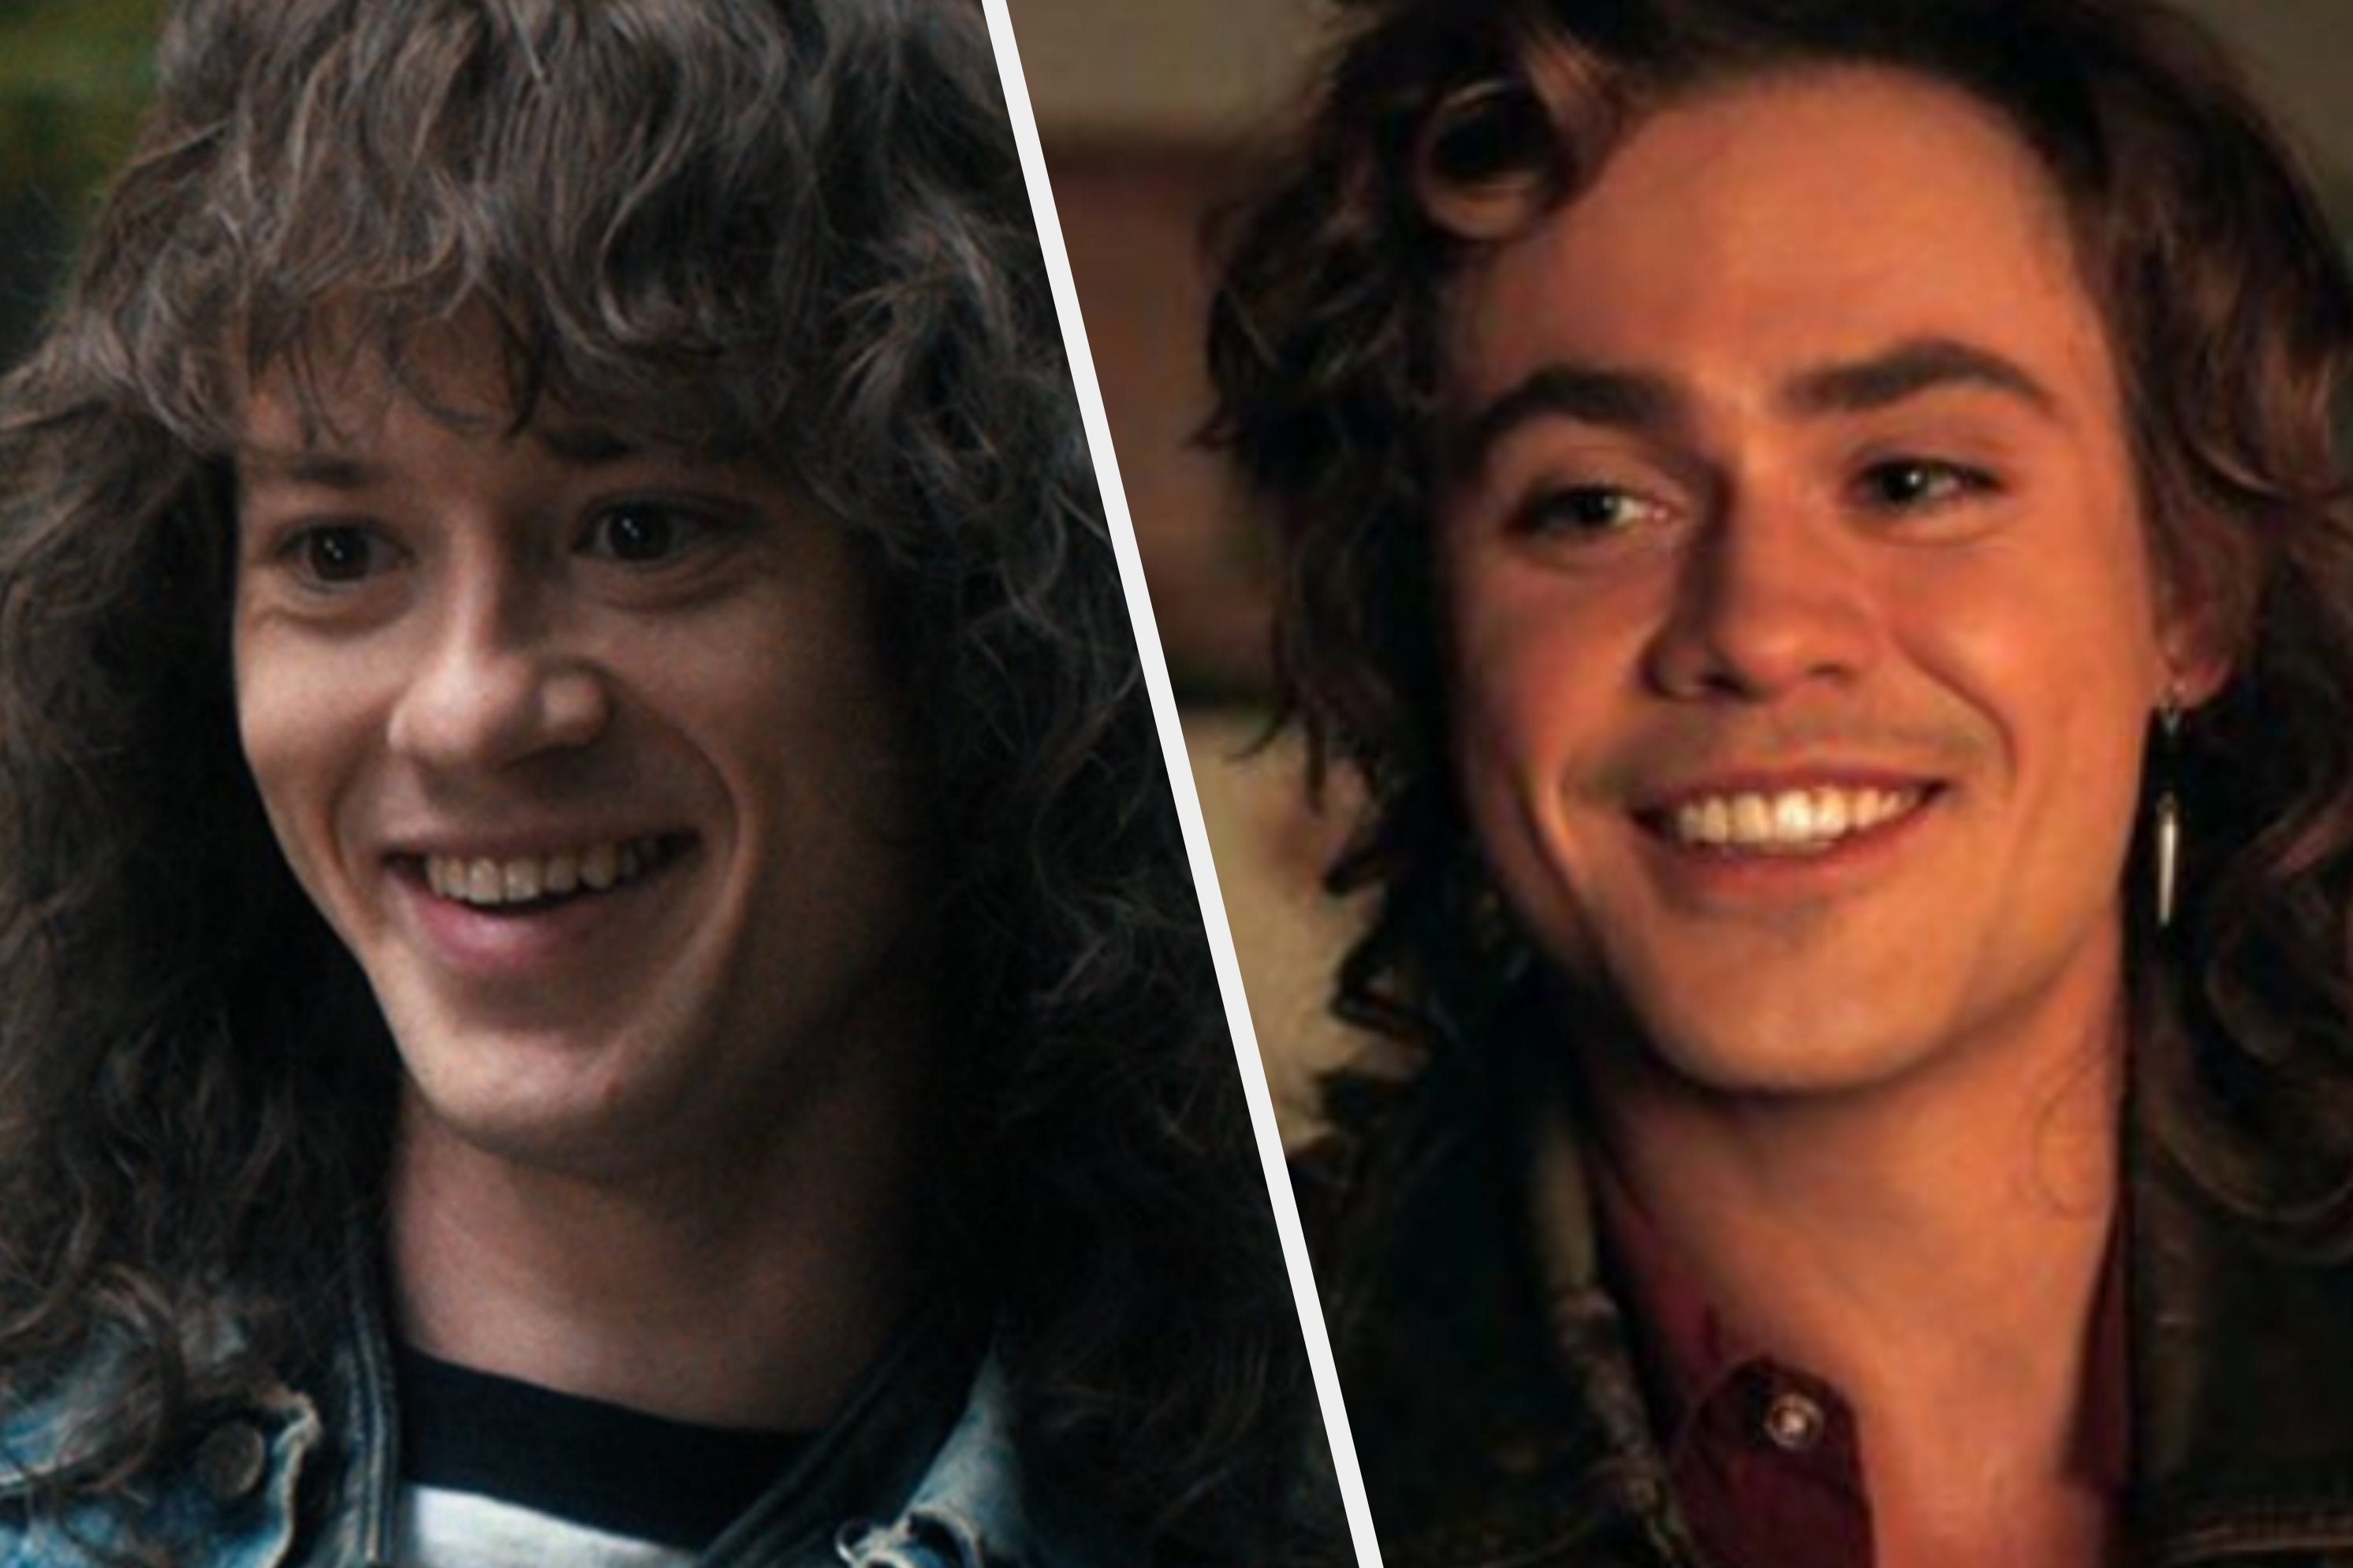 two images; on the left, Eddie from &quot;Stranger Things&quot; and on the right, Billy from &quot;Stranger Things&quot;